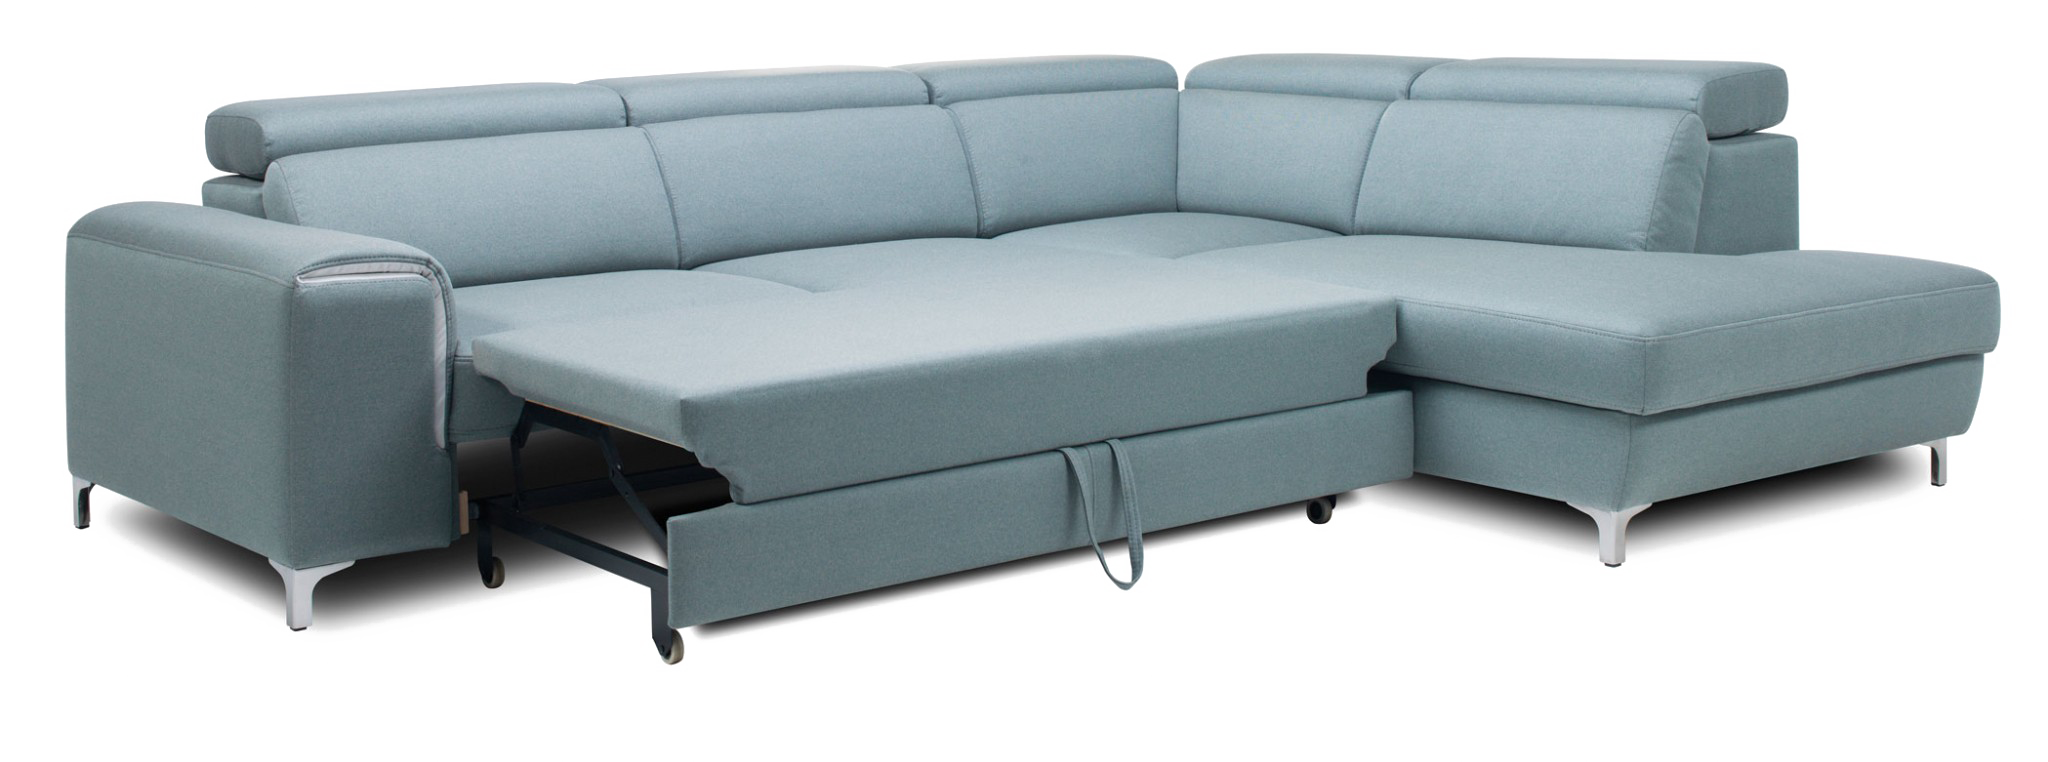 Sofa Bed PNG Free Download